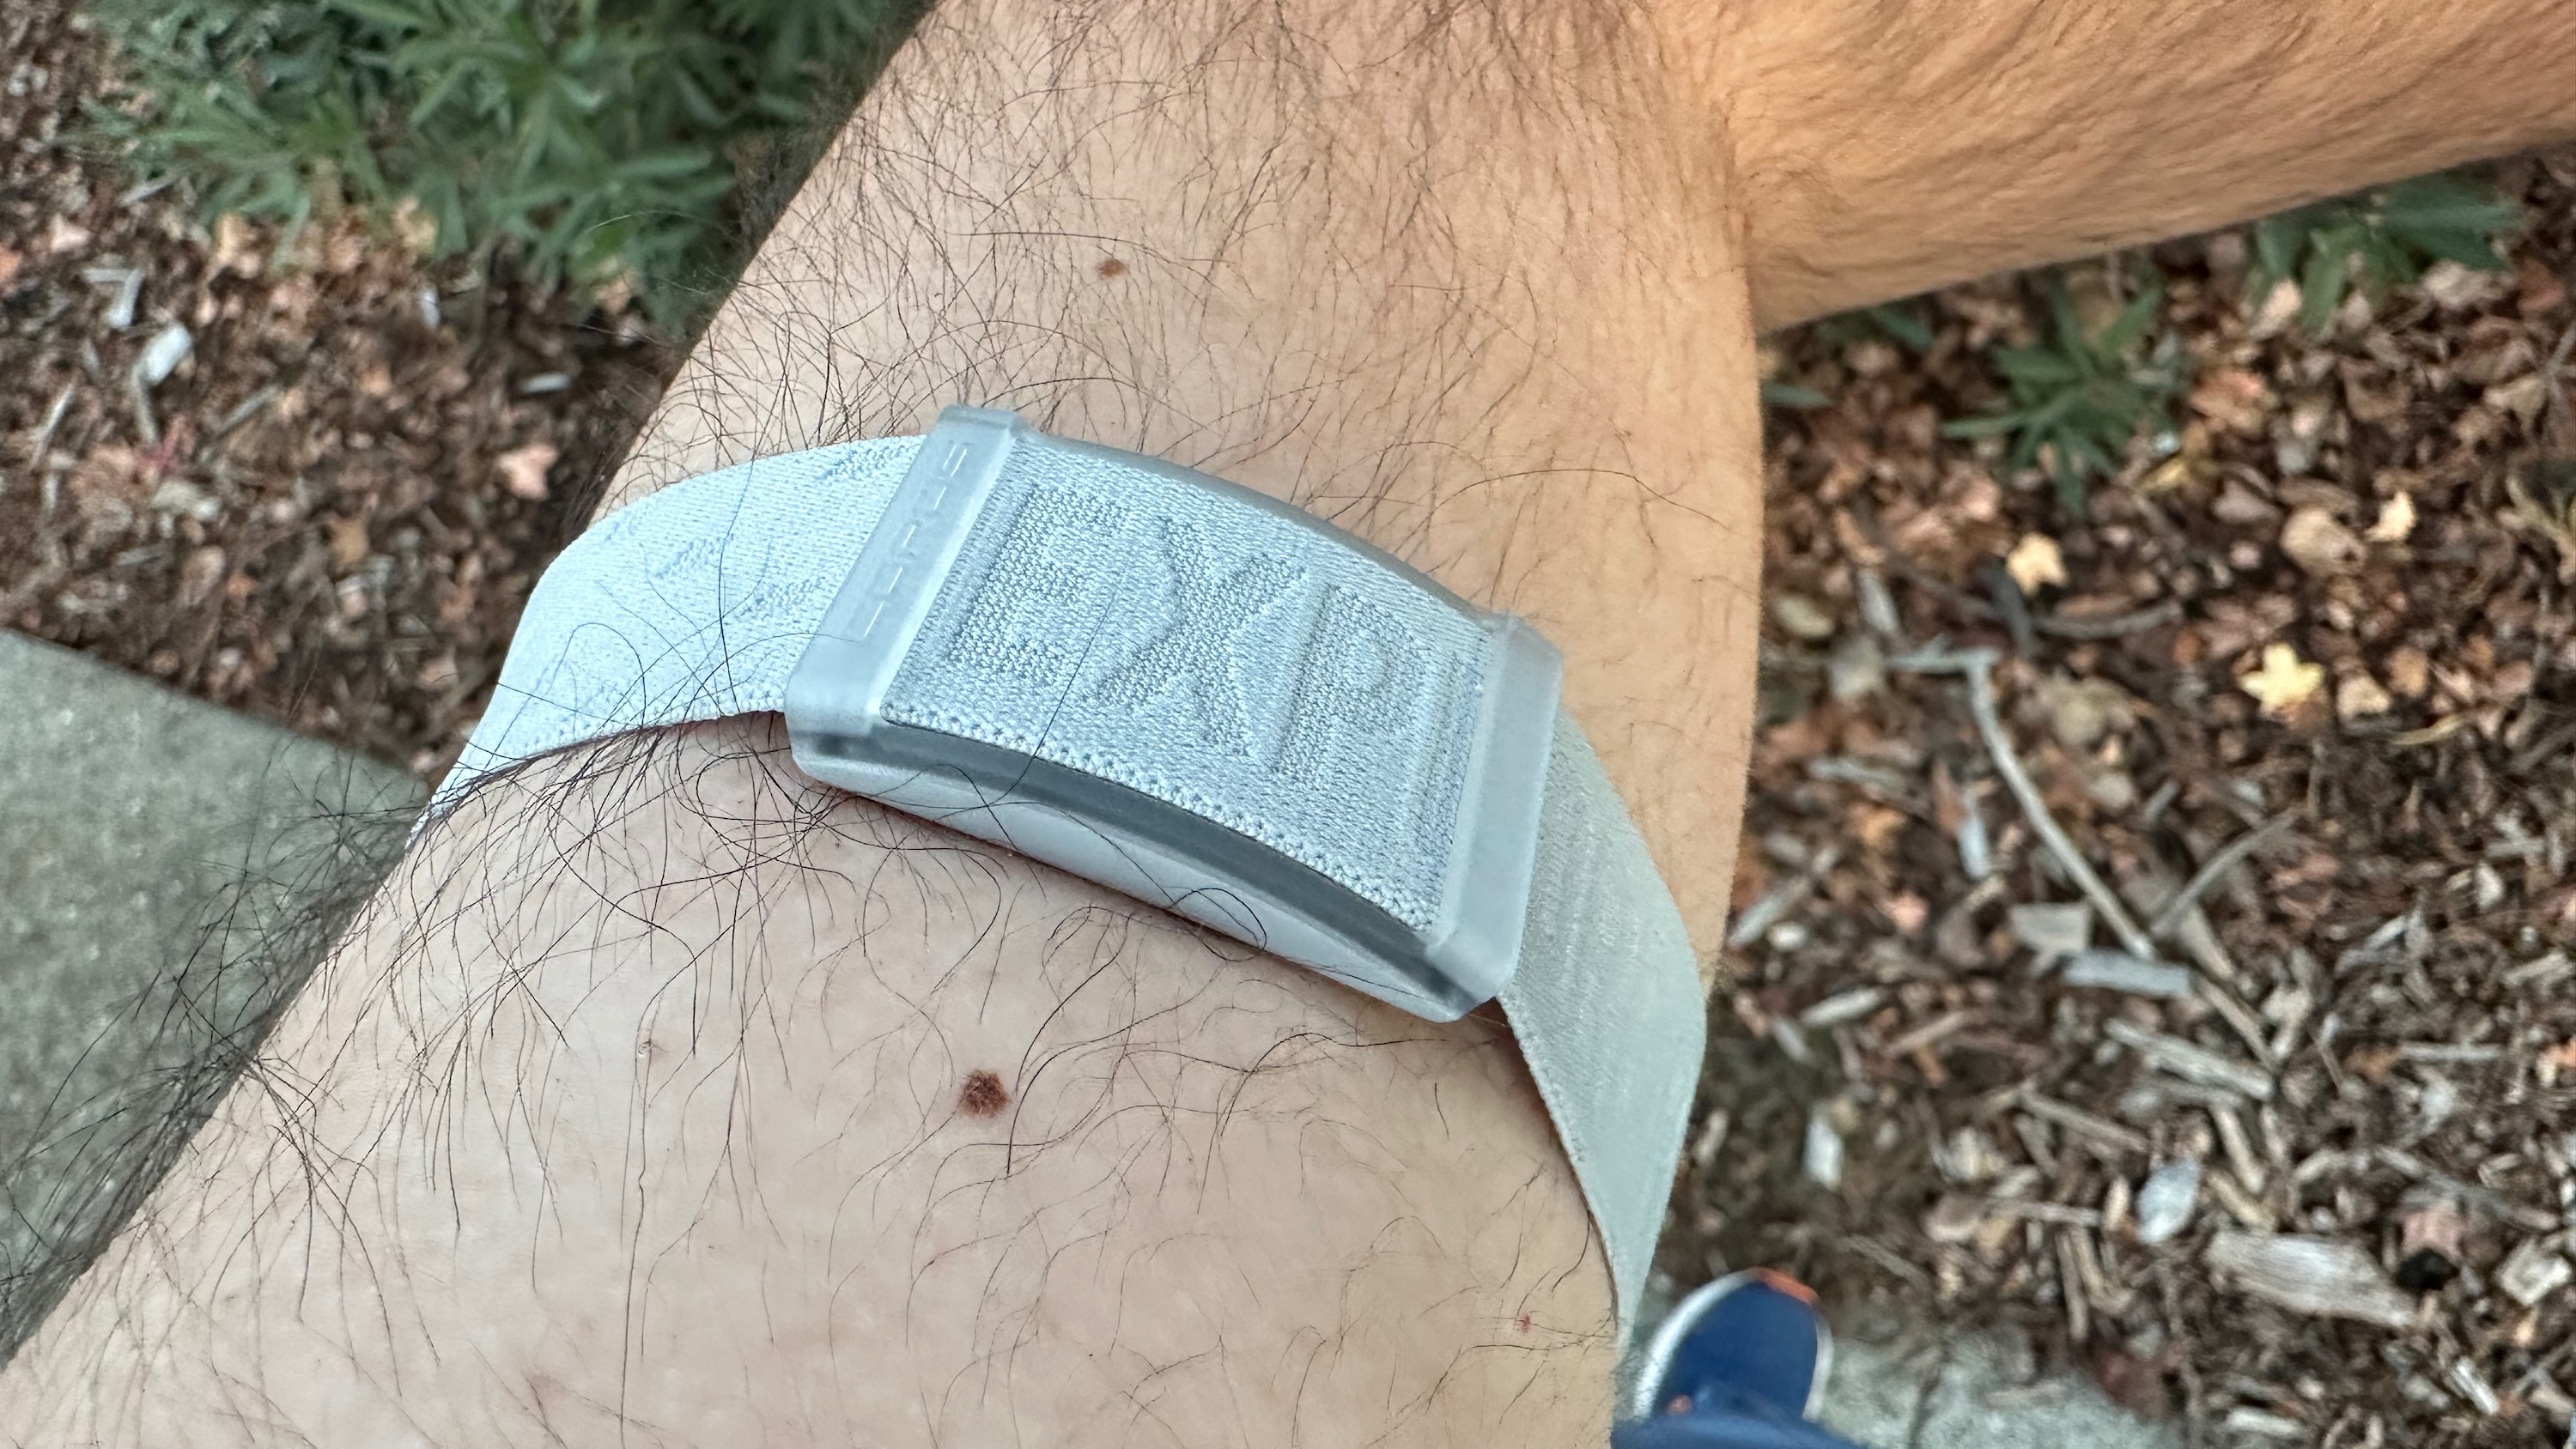 The COROS Heart Rate Monitor worn on the author's arm